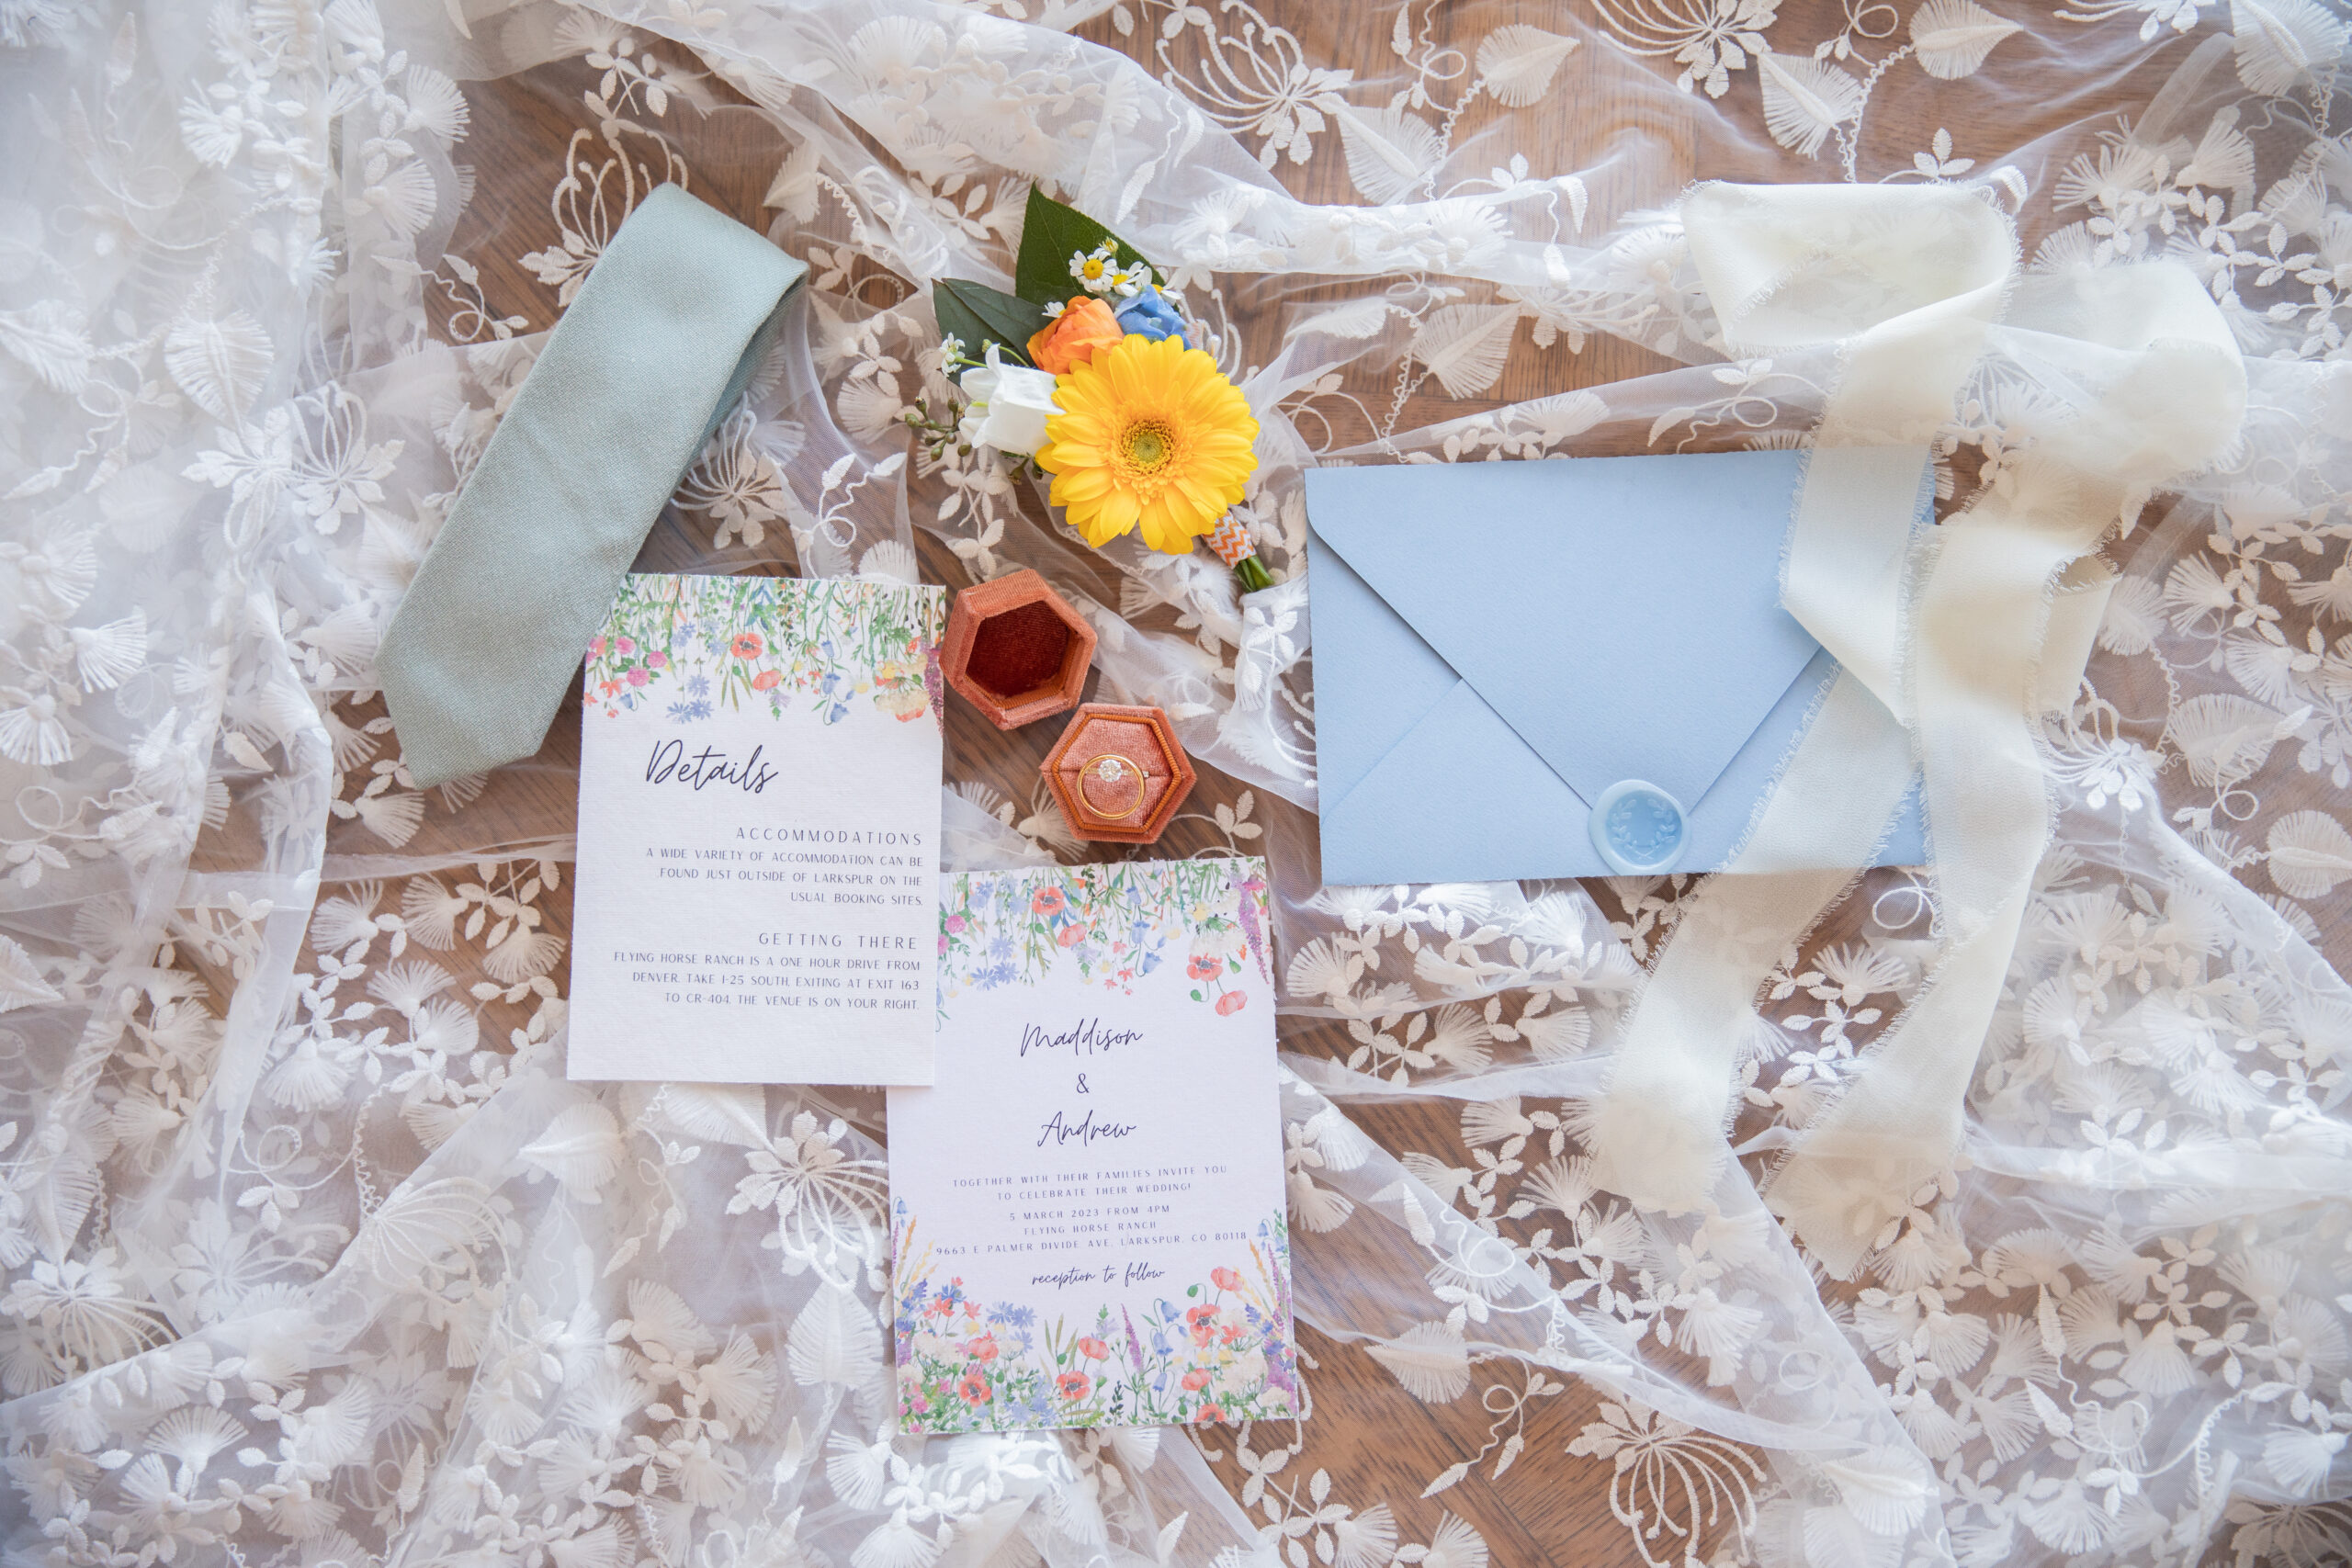 Detail shots of lace, invitations, rings, and more.